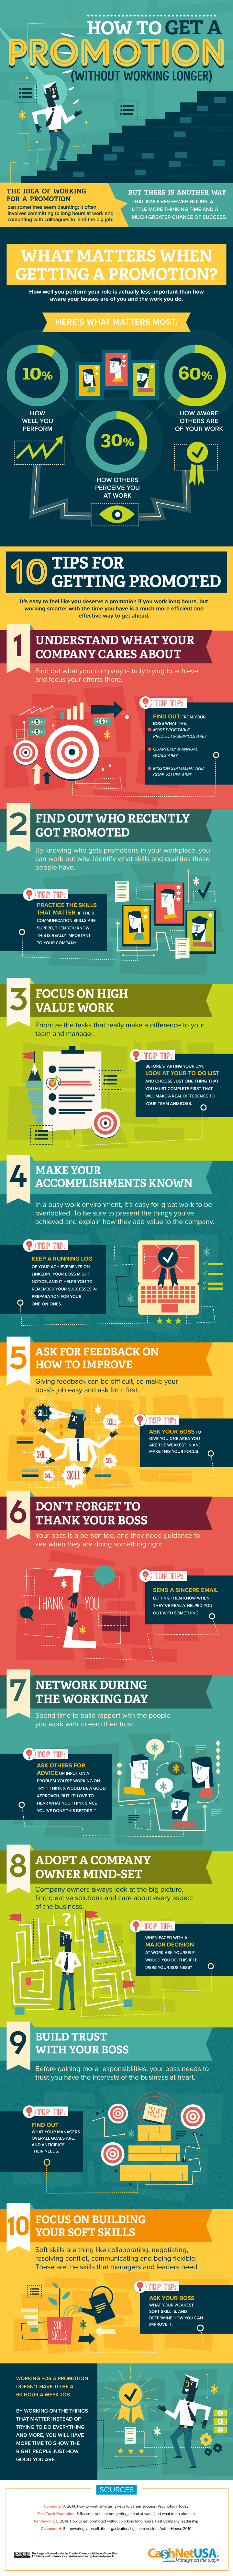 how-to-get-a-promotion-infographic